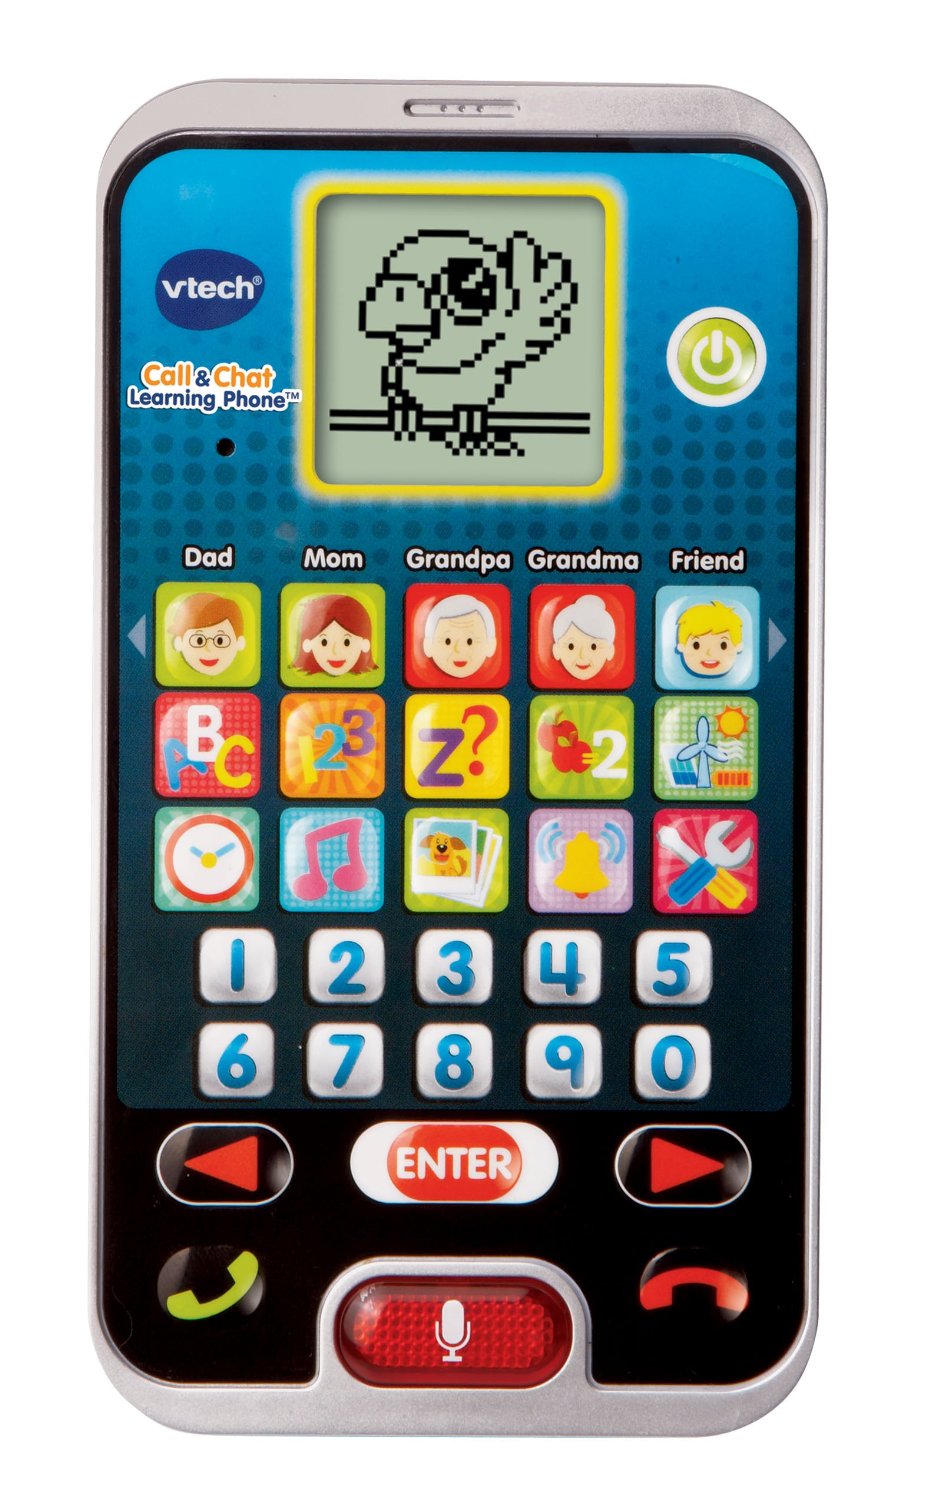 vtech-call-and-chat-learning-phone